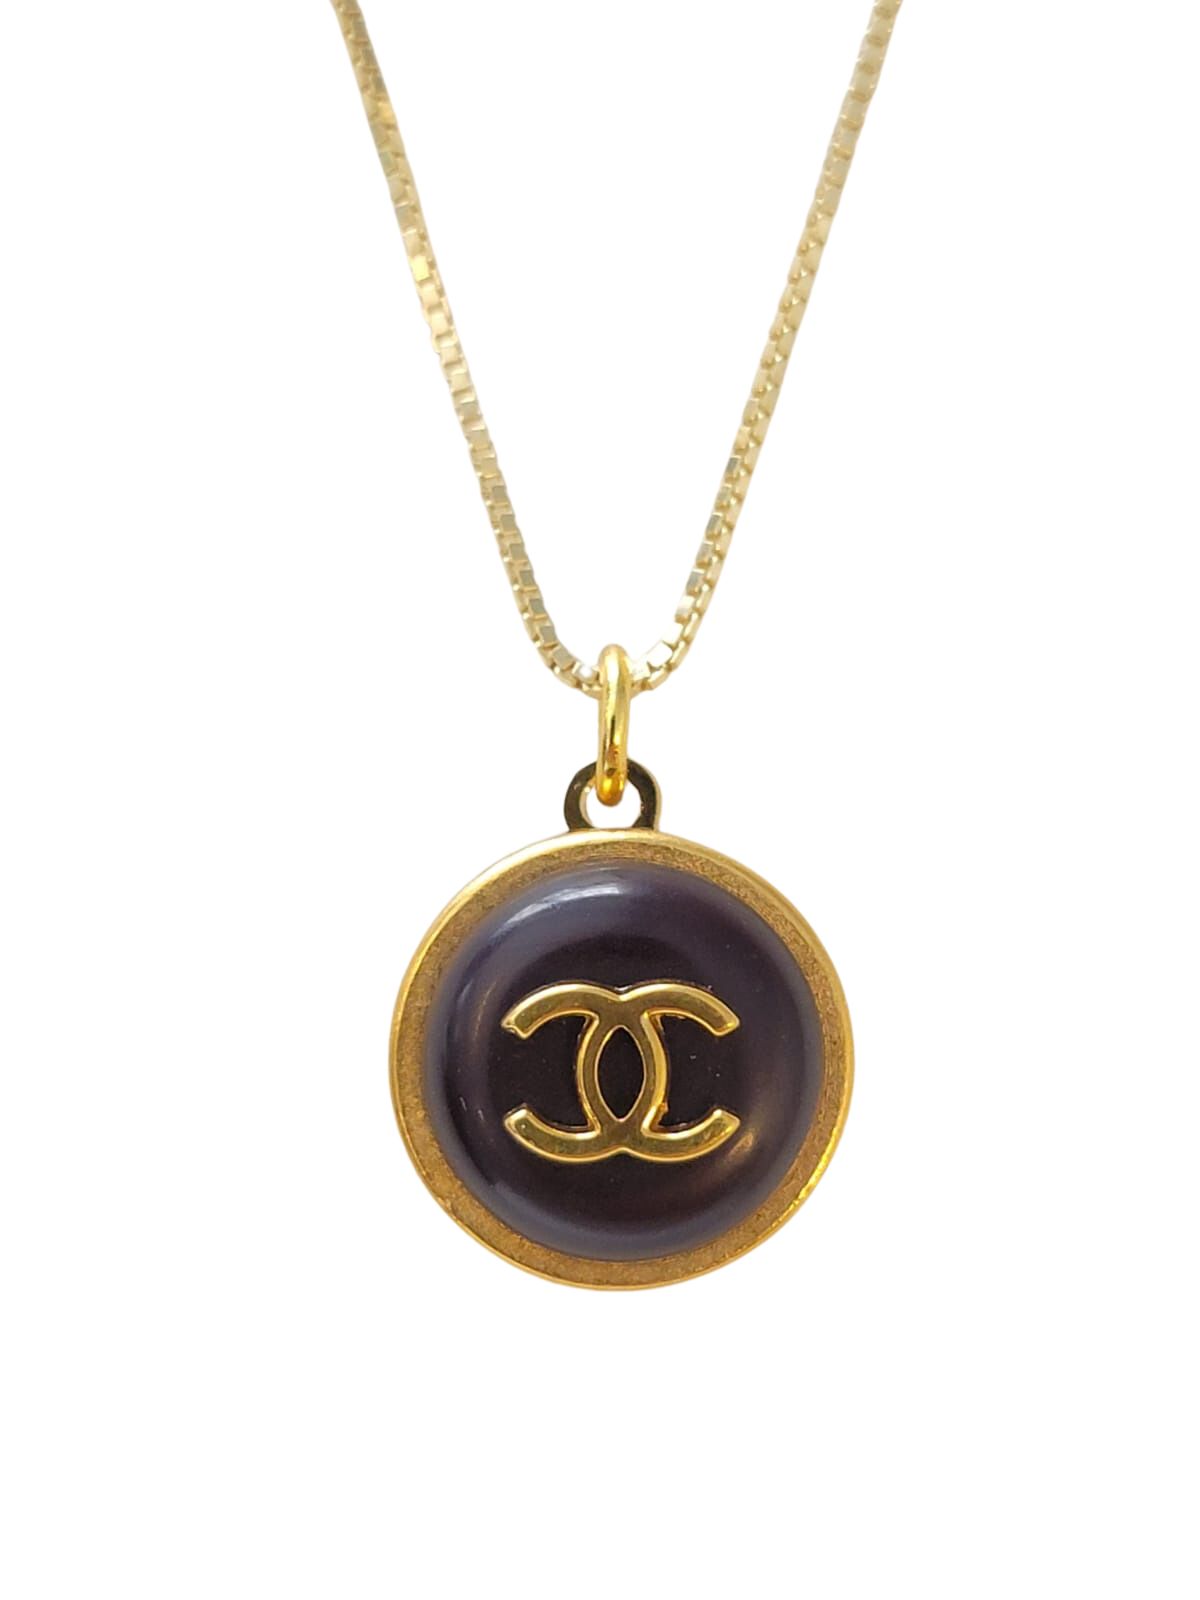 BURGUNDY WITH GOLD CC CHANEL VINTAGE BUTTON NECKLACE